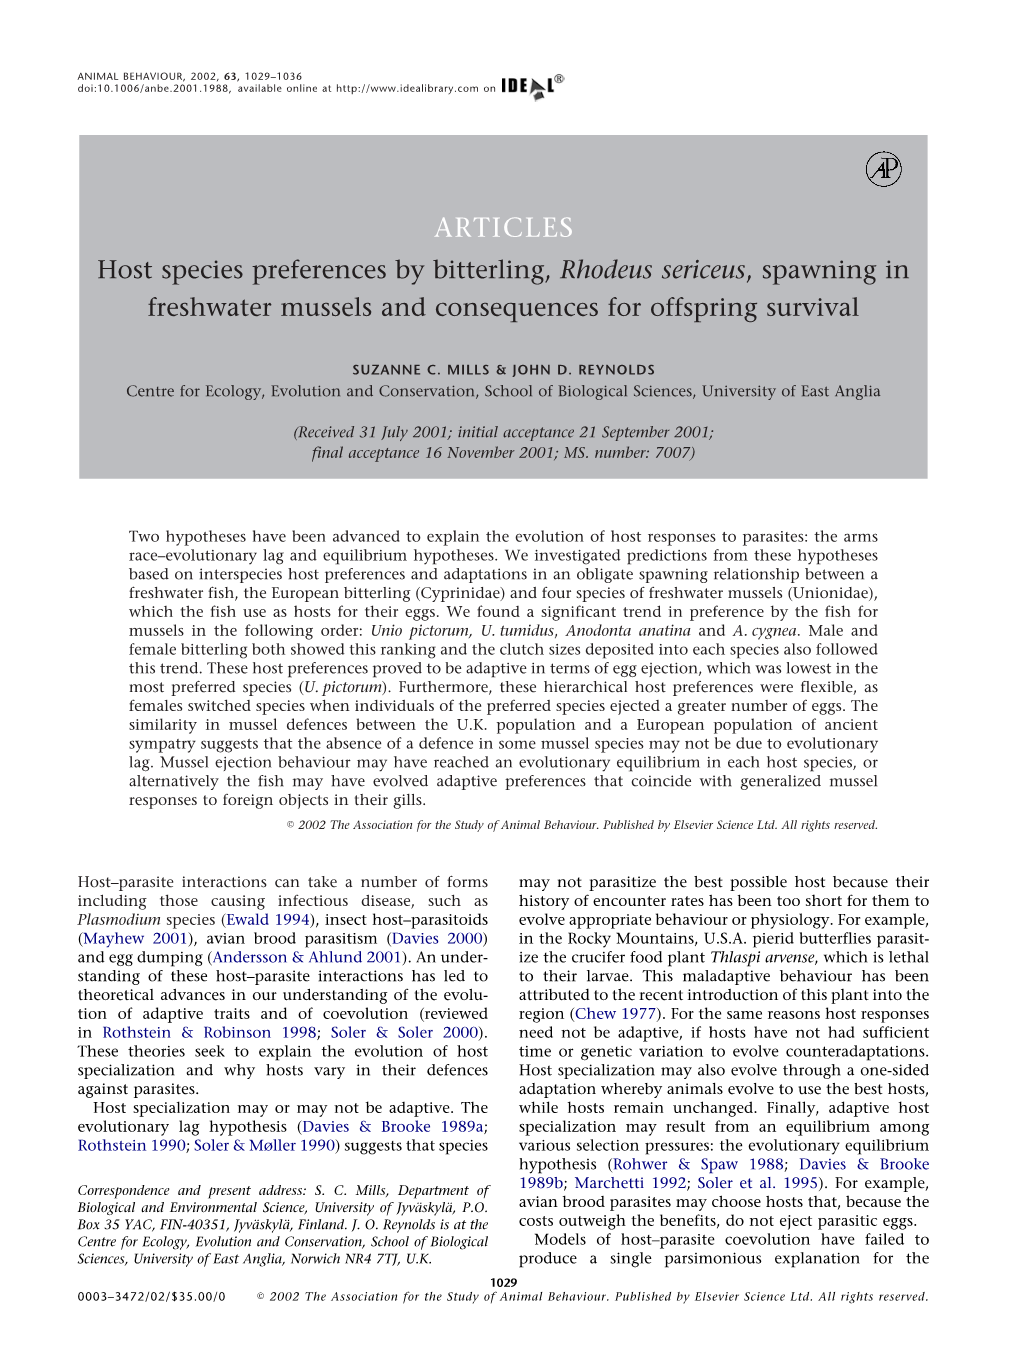 Host Species Preferences by Bitterling, Rhodeus Sericeus, Spawning in Freshwater Mussels and Consequences for Offspring Survival